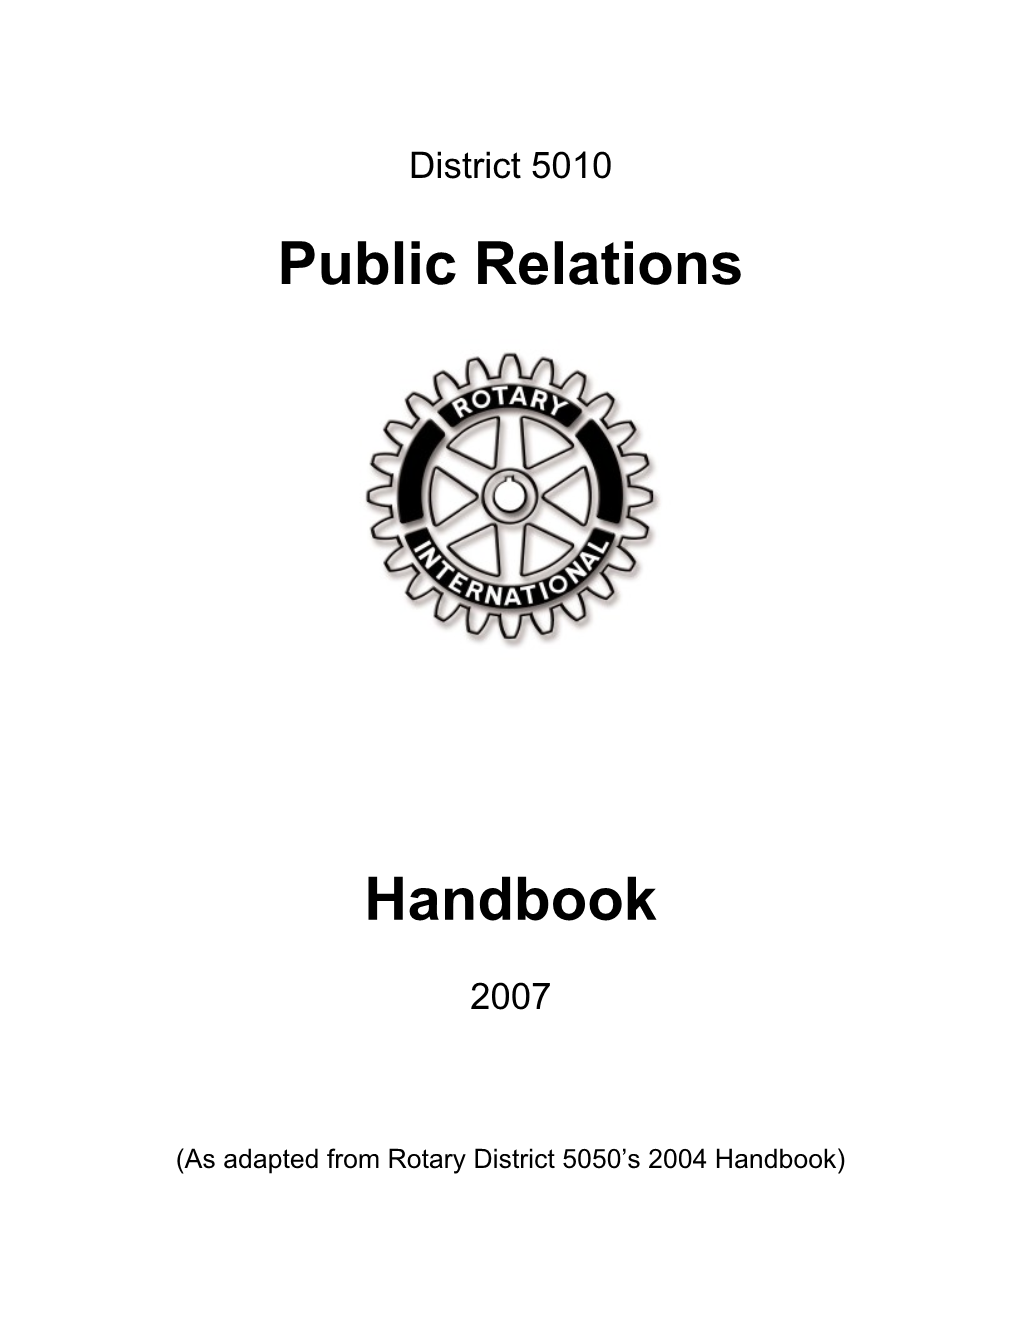 As Adapted from Rotary District 5050 S 2004 Handbook